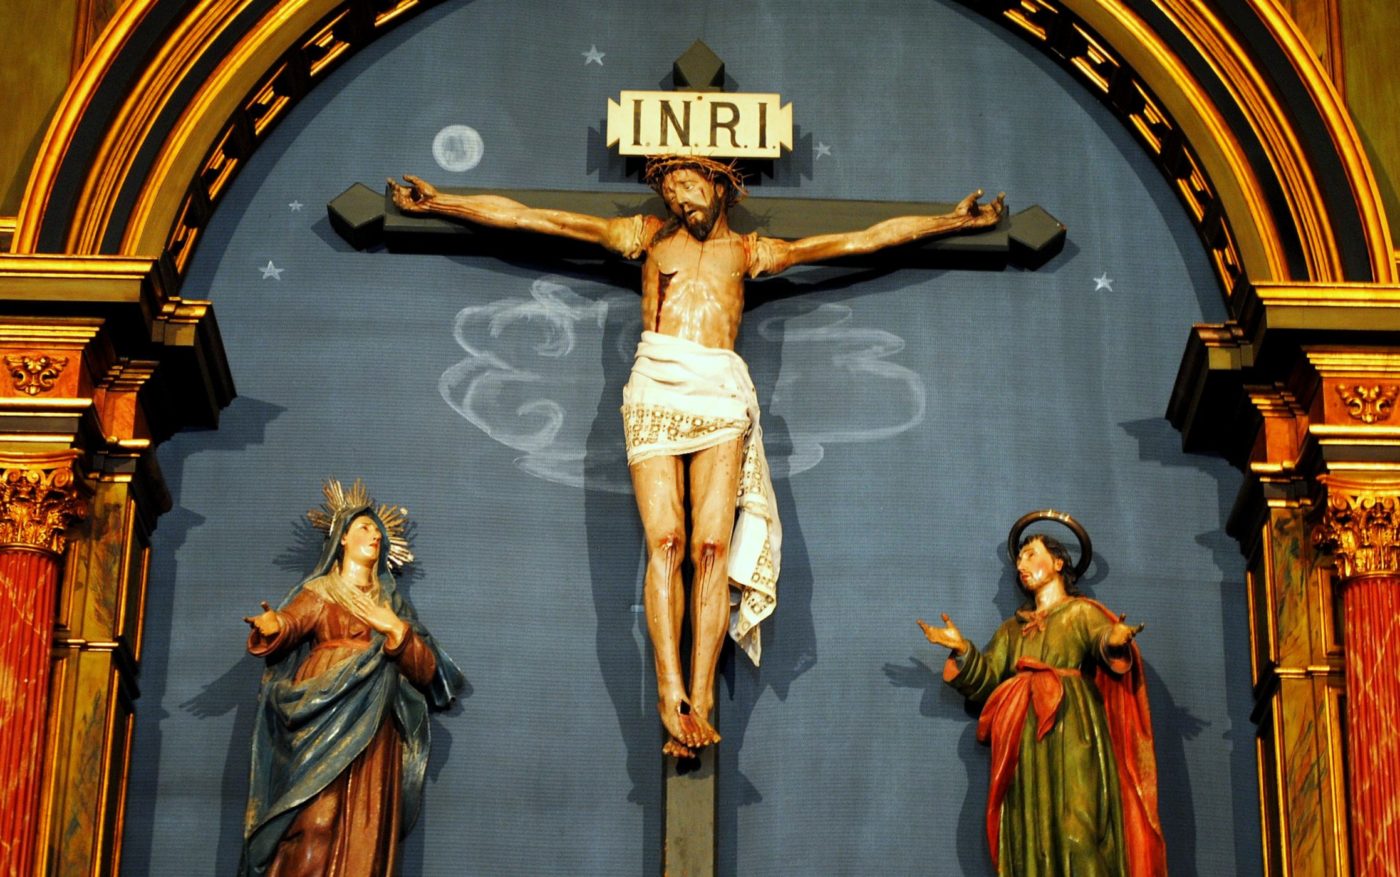 Image of the crucified Christ